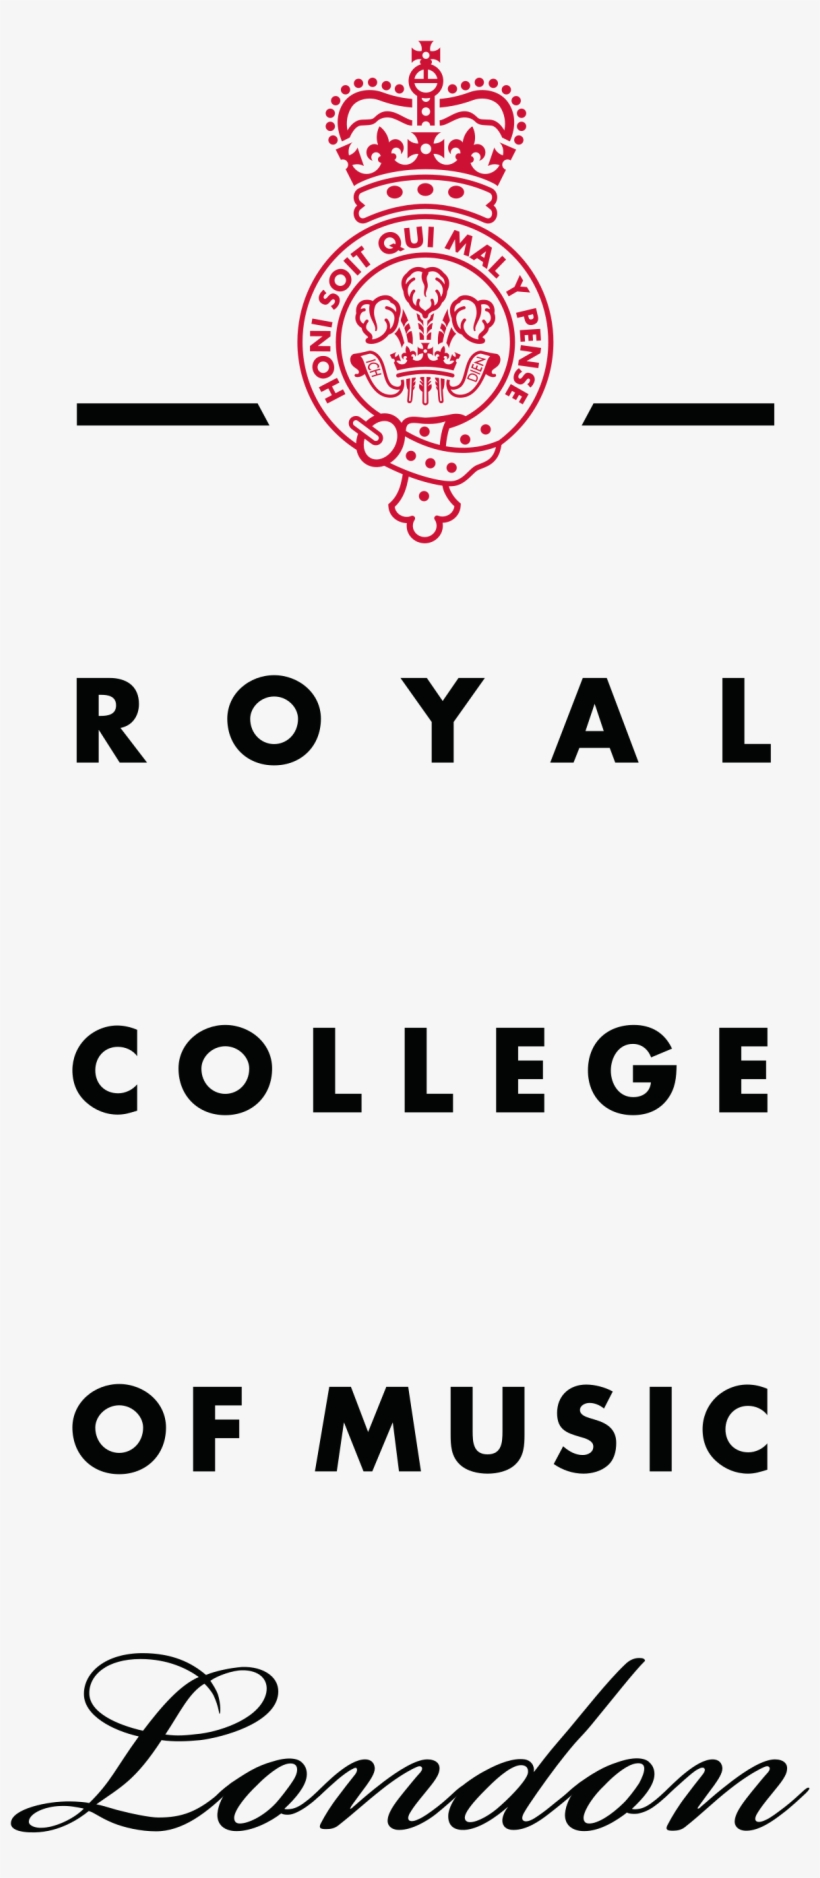 Royal College Of Music Logo - Royal College Of Music Logo Png, transparent png #2279421